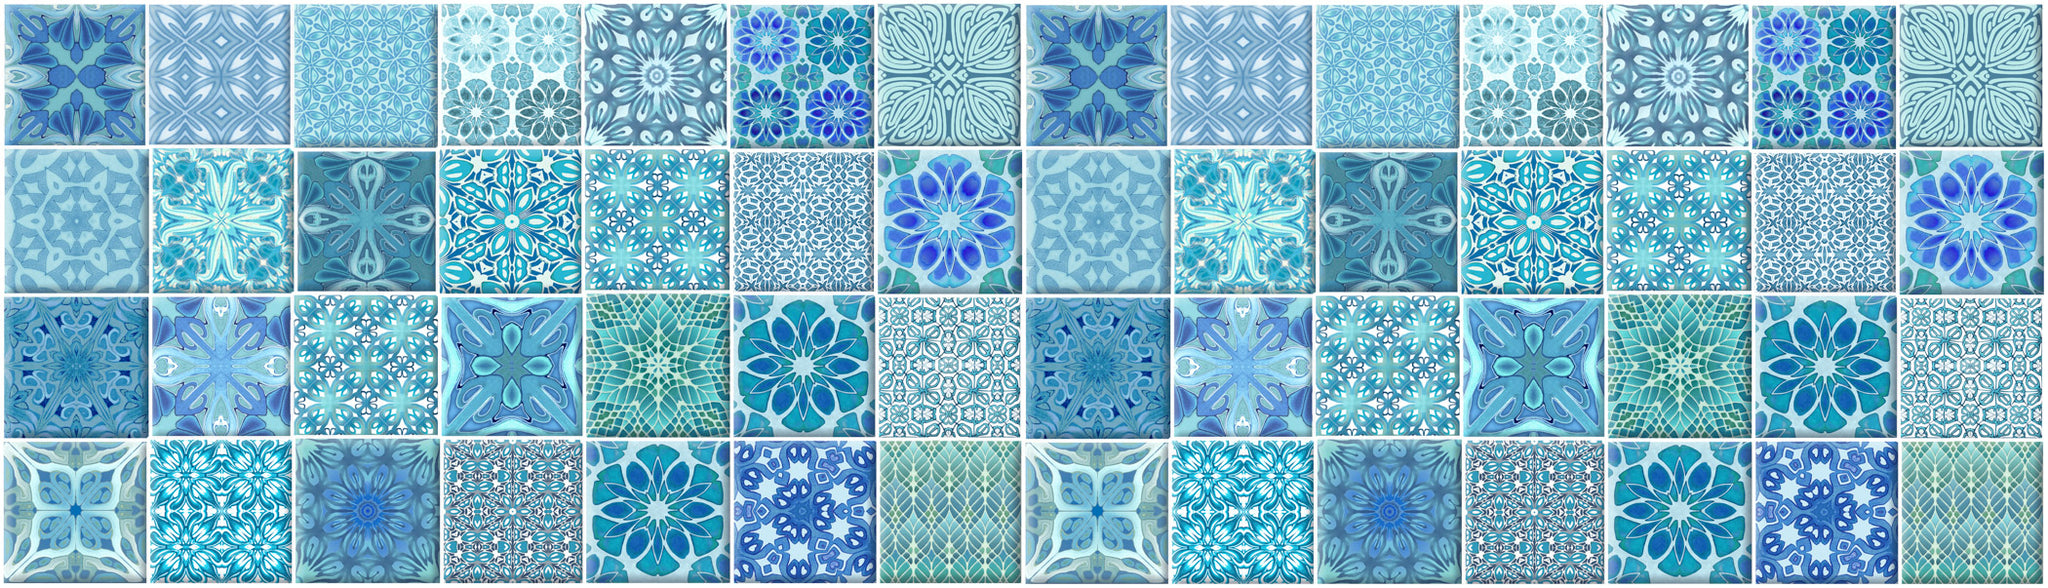 Mix and Match turquoise tiles - DoodlePippin finish